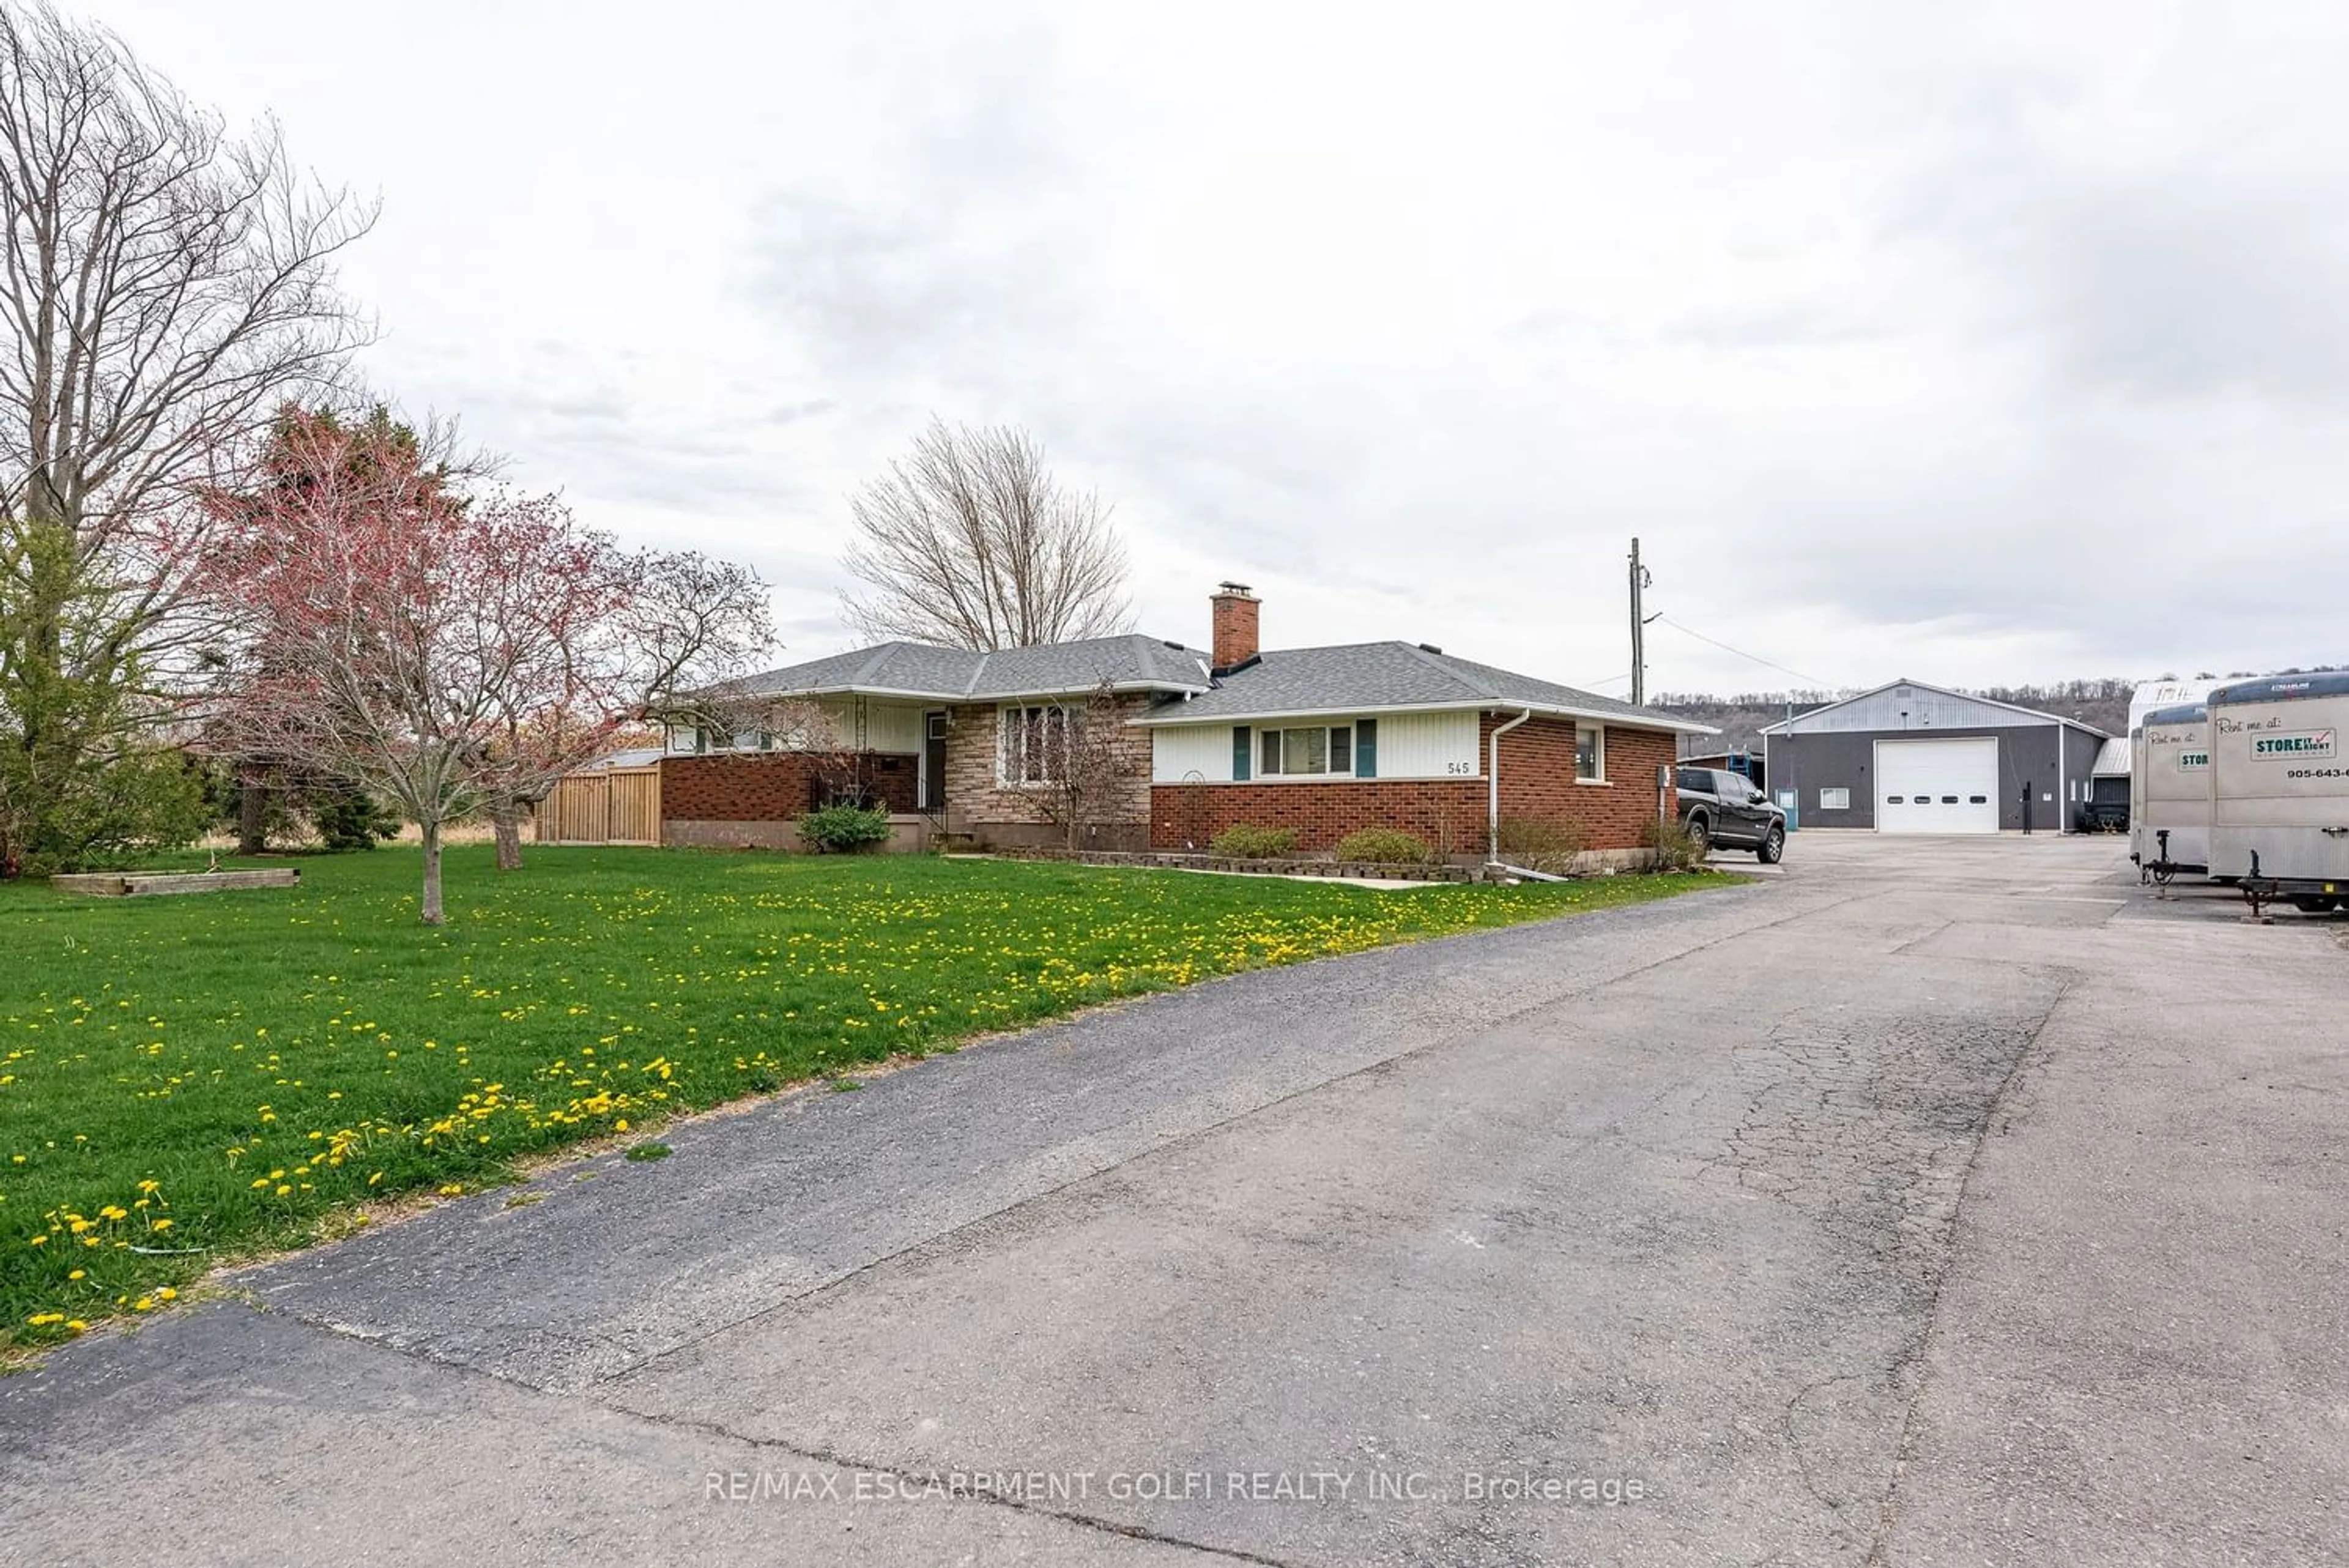 Frontside or backside of a home for 545 Main St, Grimsby Ontario L3M 1T7